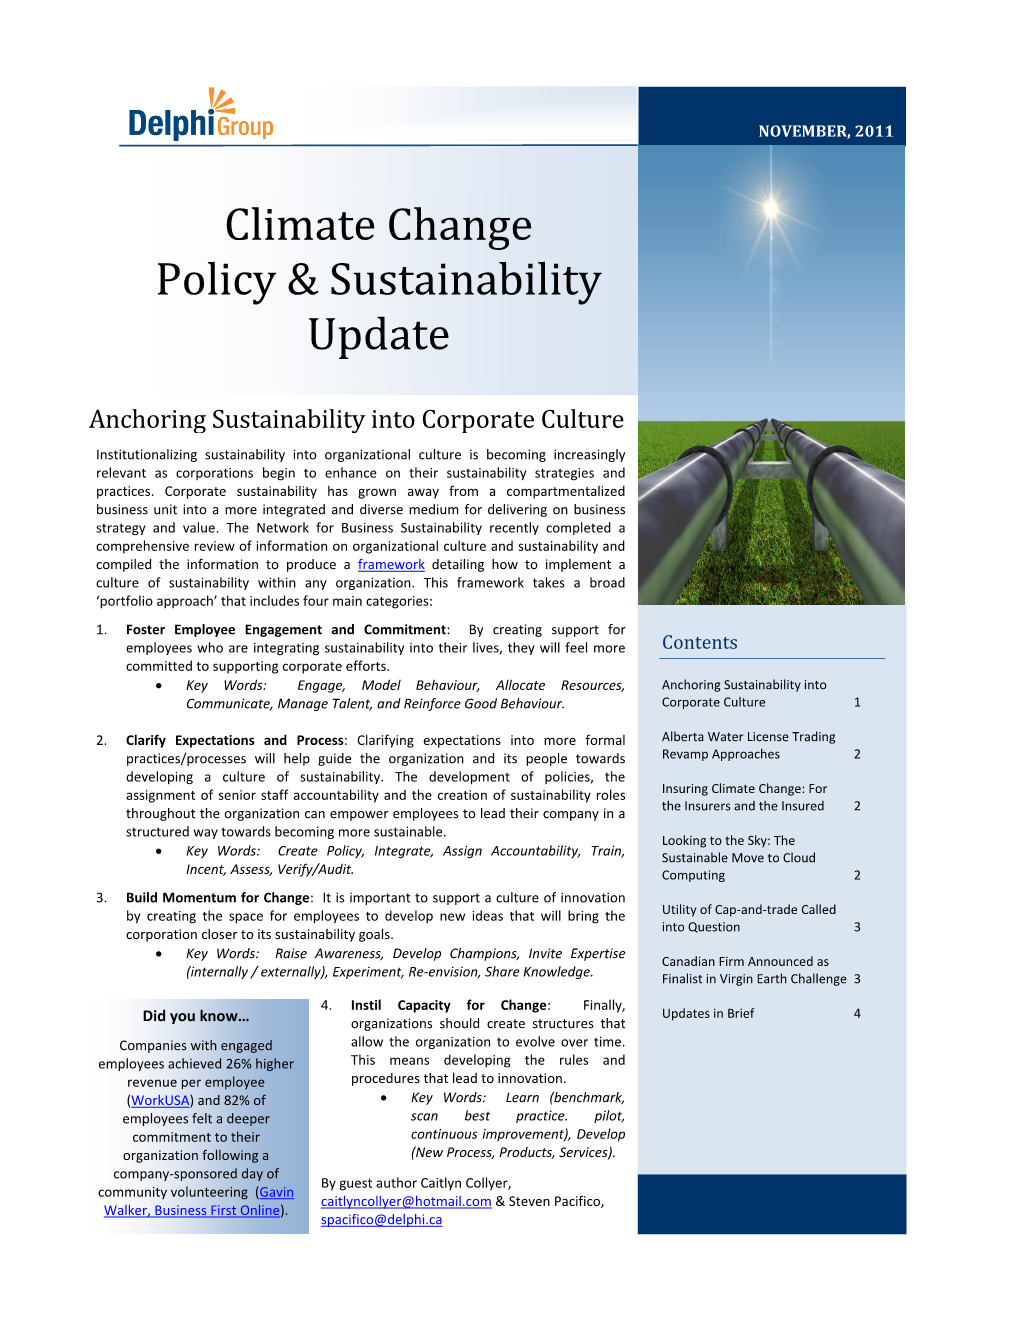 Climate Change Policy & Sustainability Update